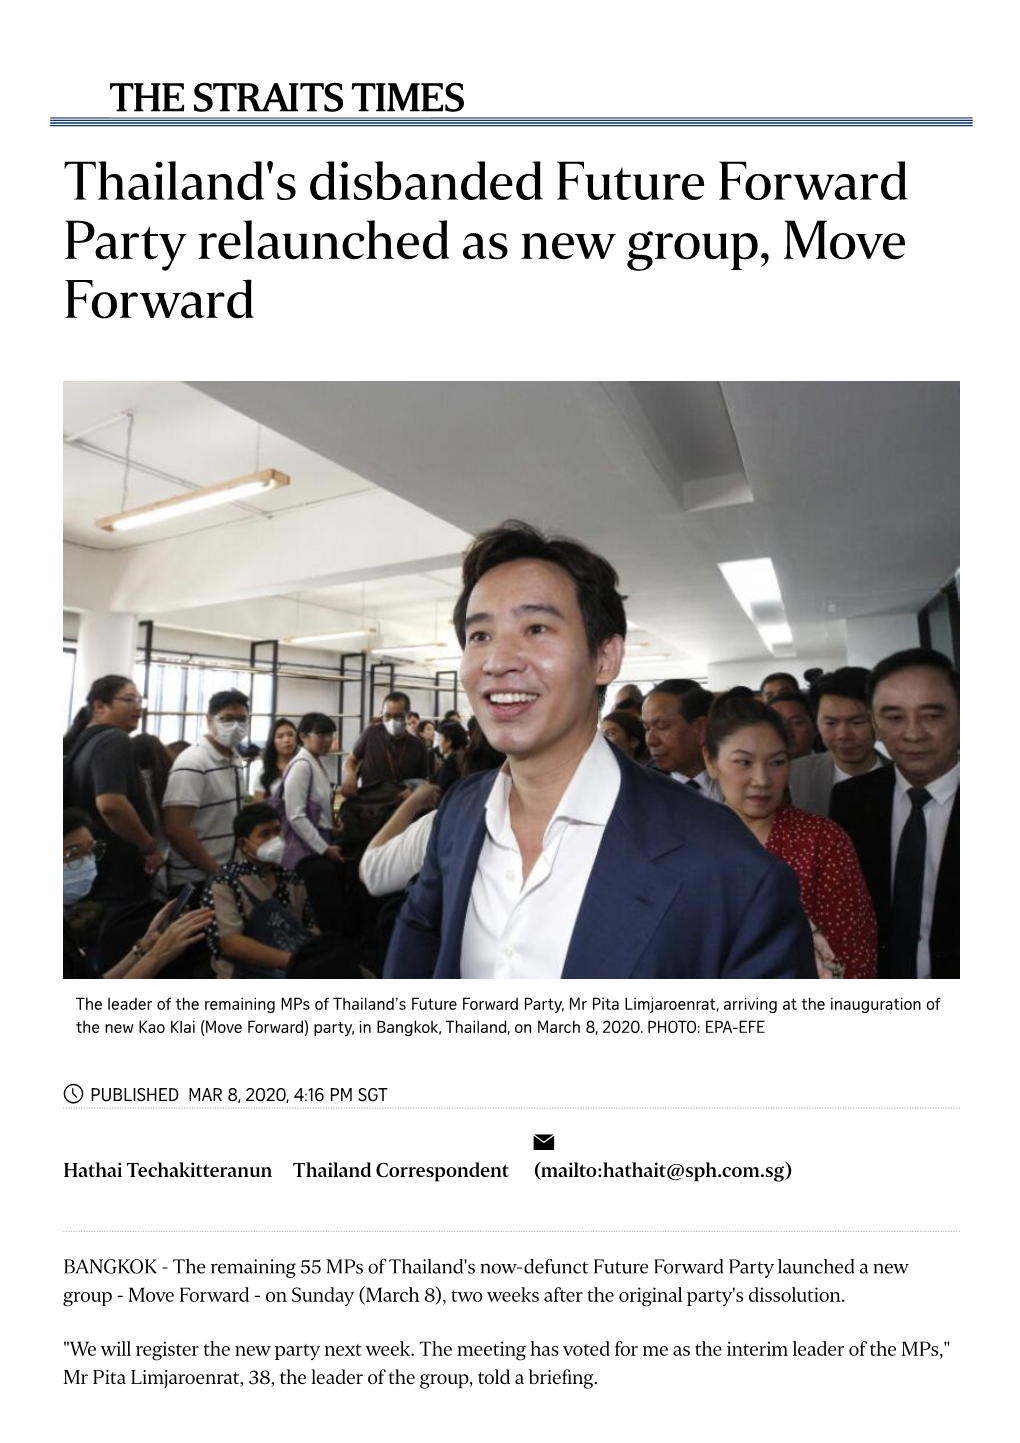 Thailand's Disbanded Future Forward Party Relaunched As New Group, Move Forward